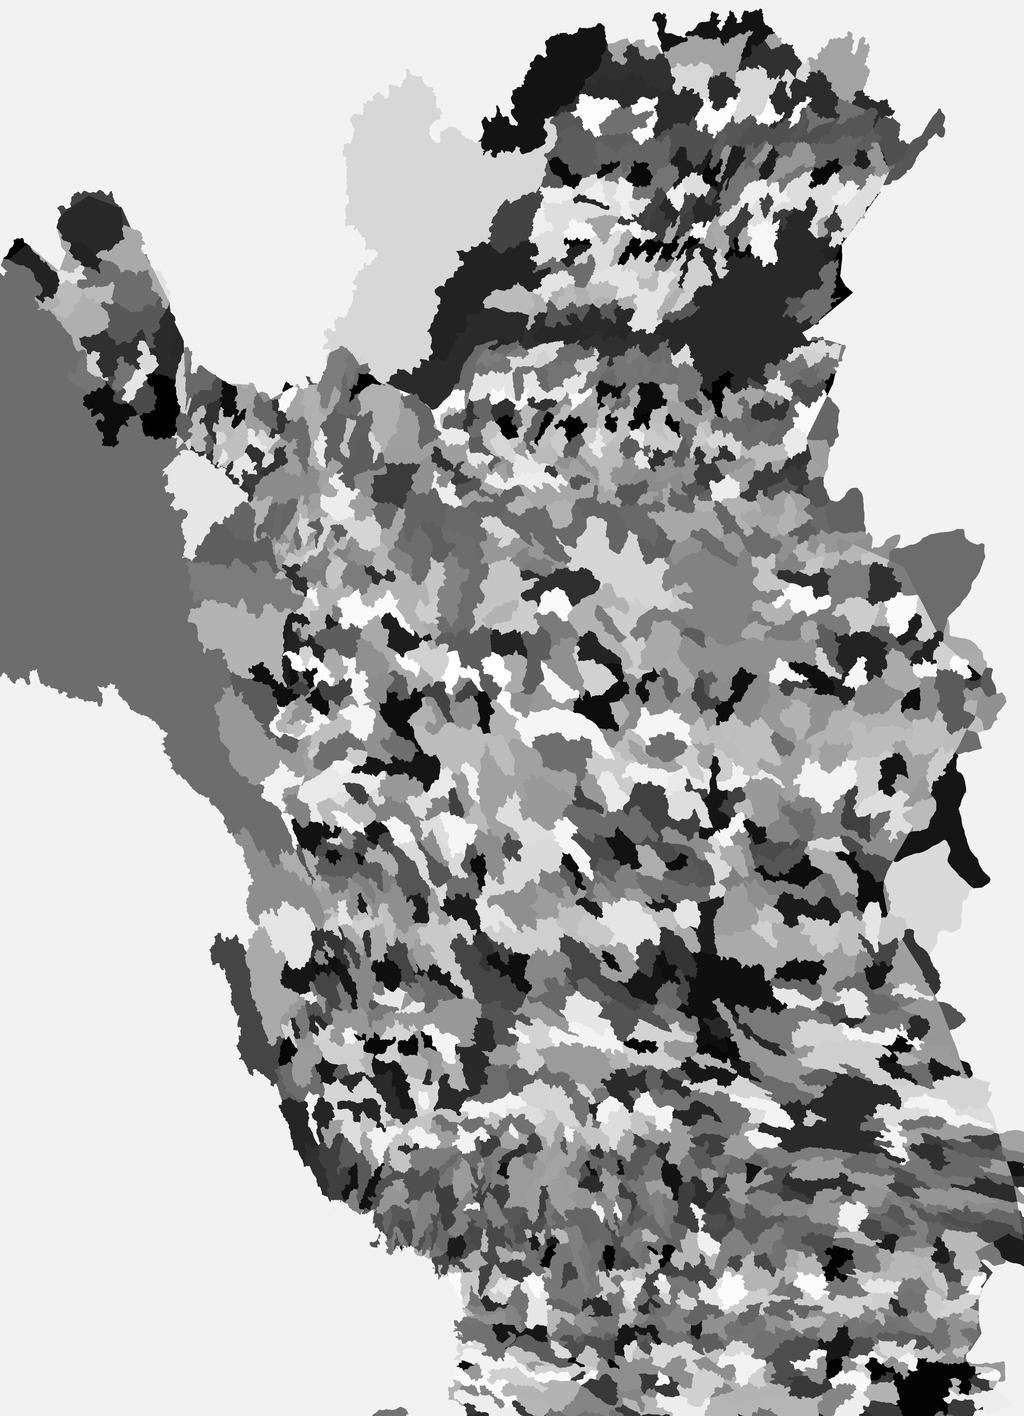 Figure 1: The coverage of the RADARSAT images (left), and 2037 sub drainage areas of the Northern Finland shown in different shades of gray (right).